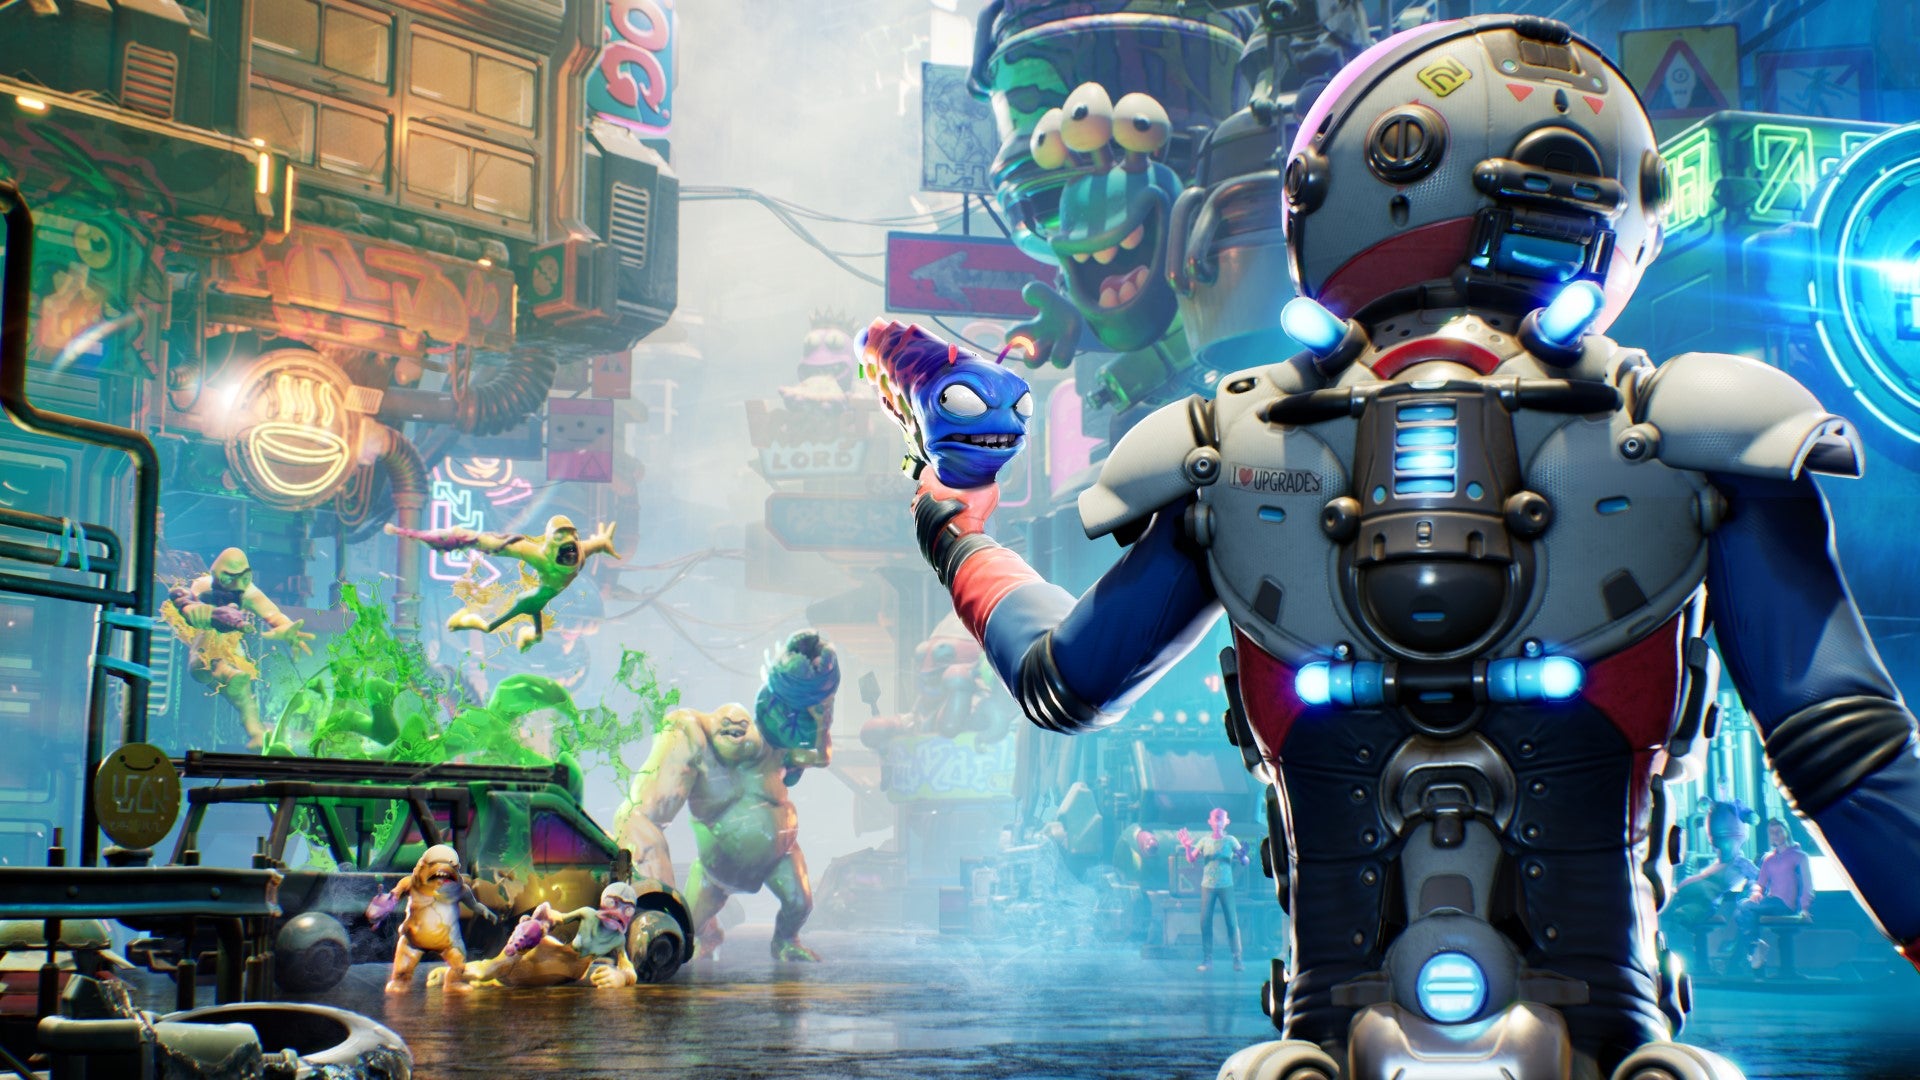 High On Life's key art which shows the main character wielding a blue alien gun and looking at some gangly green enemies.